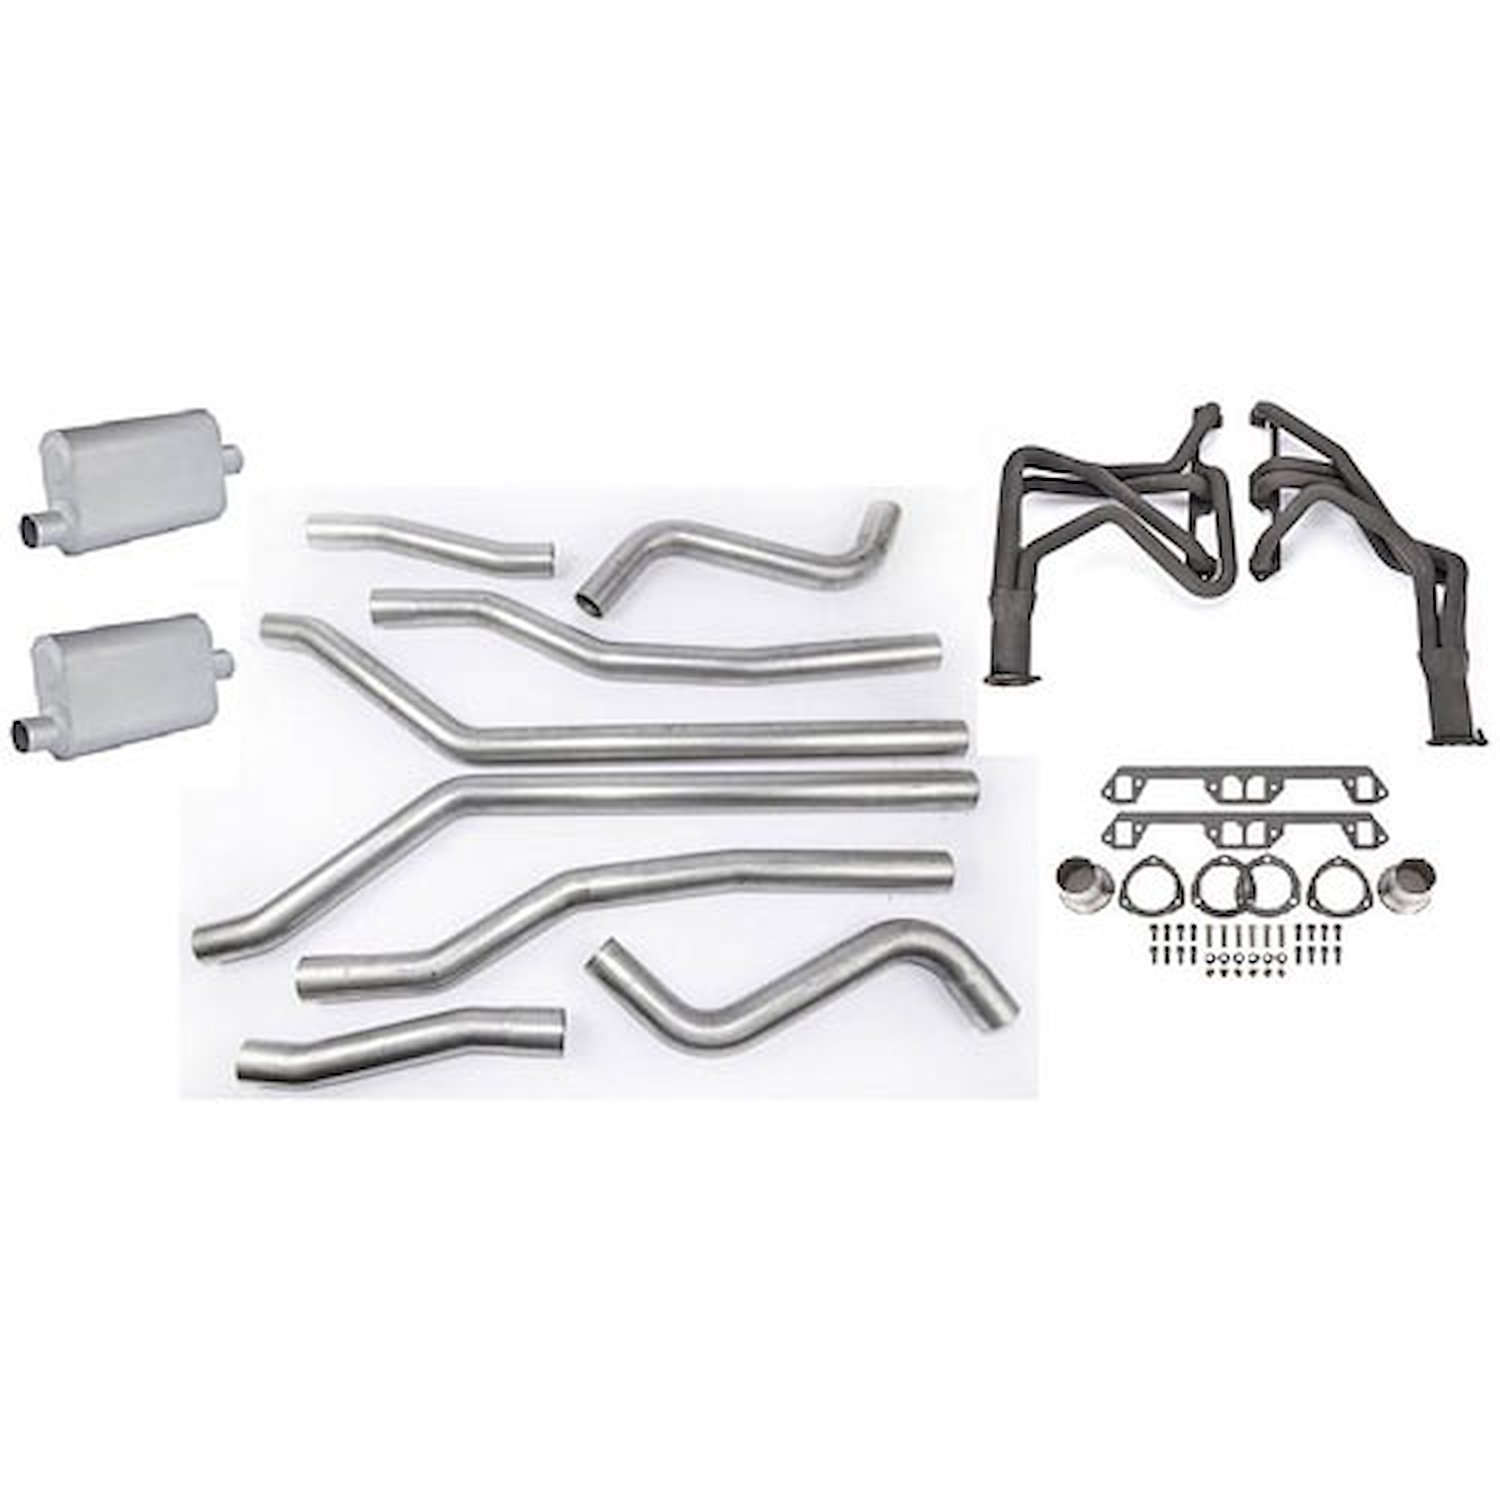 Complete Header Exhaust System Fits: (Small Block Mopar 318-360ci) 1968-74 Dodge Charger/Coronet/Super Bee/RT